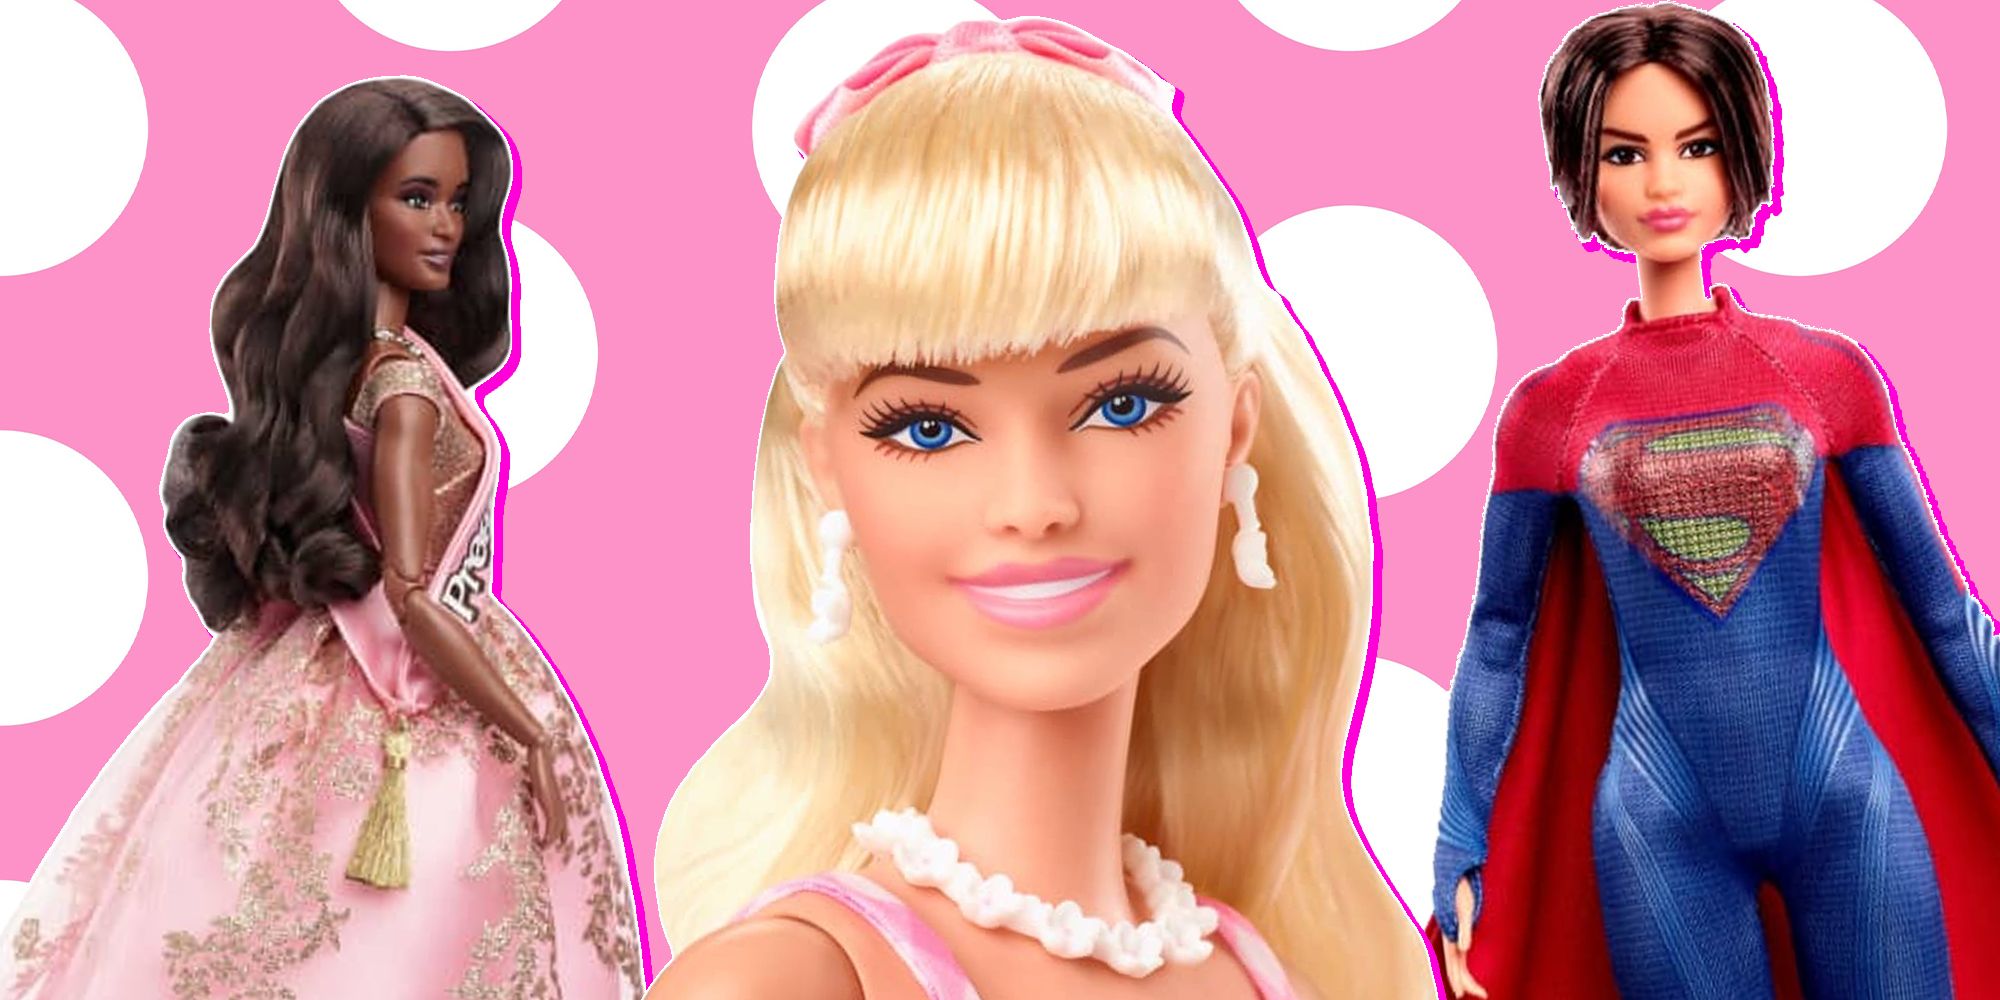 Barbie maker says higher prices are coming just in time for the